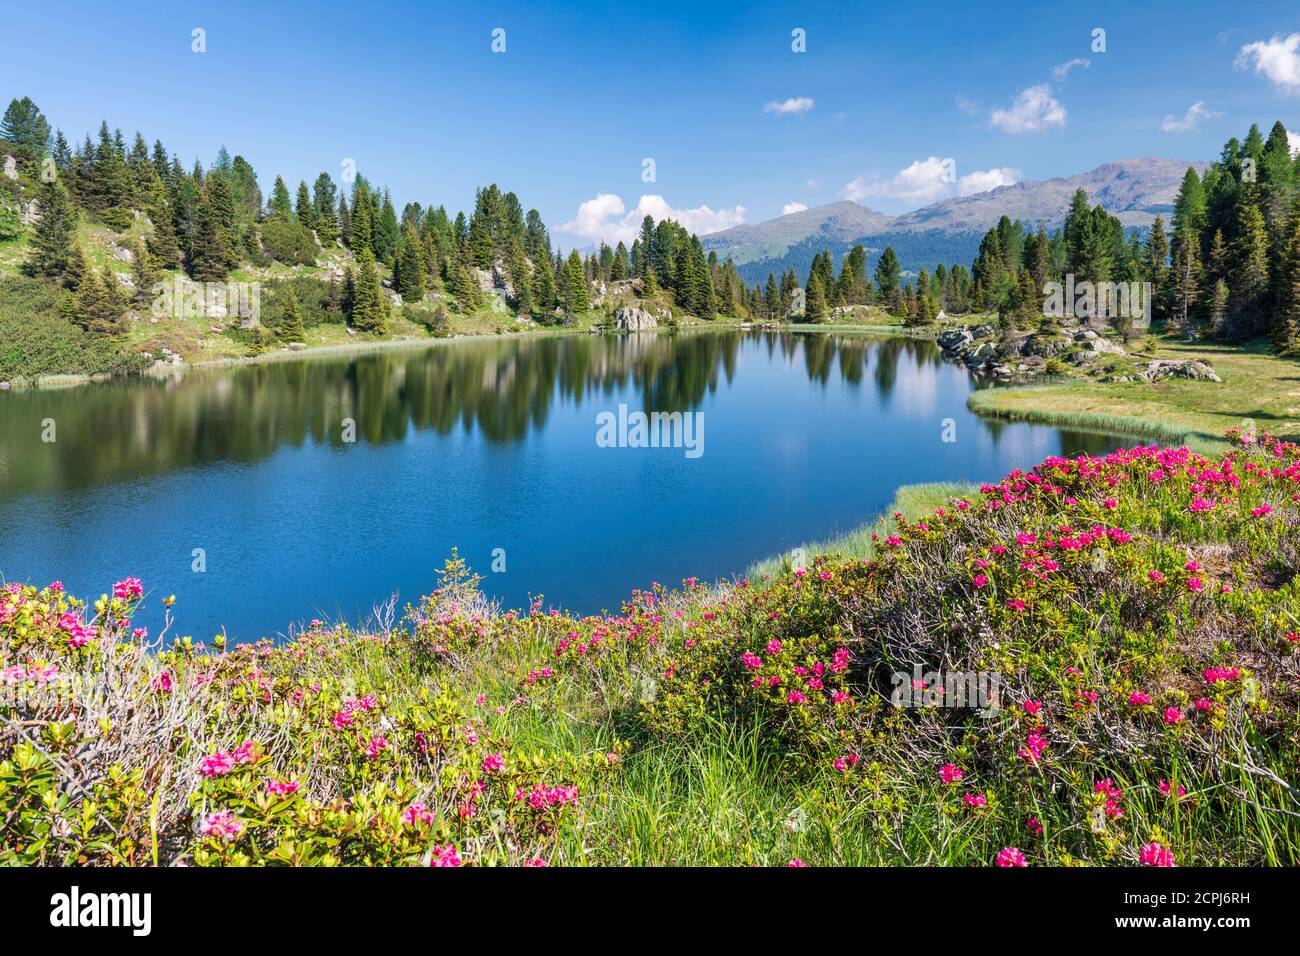 Europe, Italy, Trentino, Trento, Lagorai chain, the Colbricon lakes in summer with rhododendron flowering and mountain reflected on the water Stock Photo